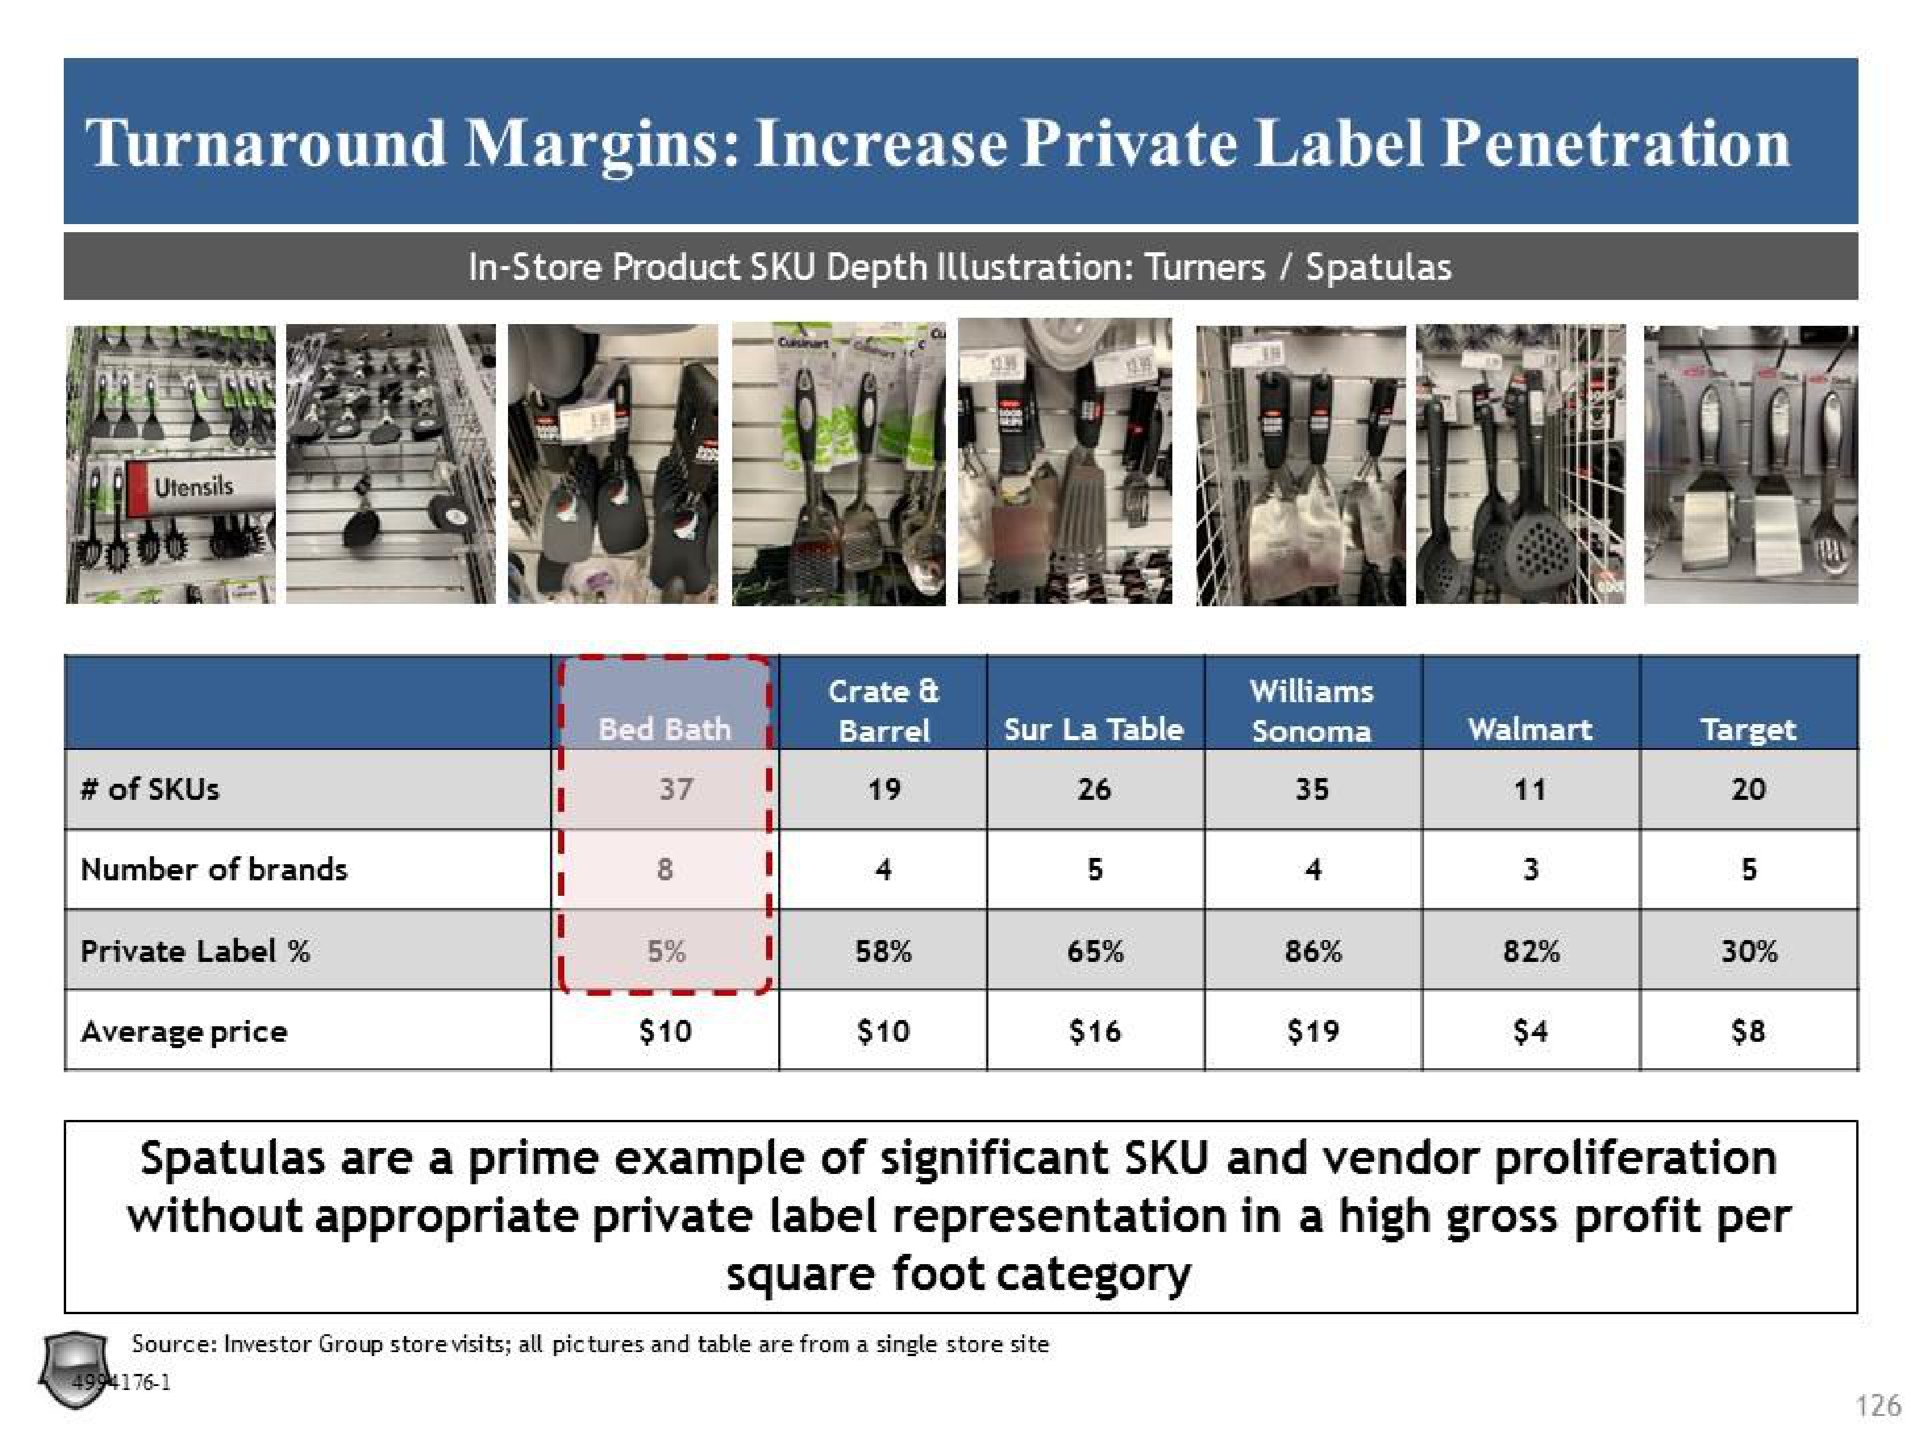 turnaround margins increase private label penetration spatulas are a prime example of significant and vendor proliferation without appropriate private label representation in a high gross profit per square foot category | Legion Partners